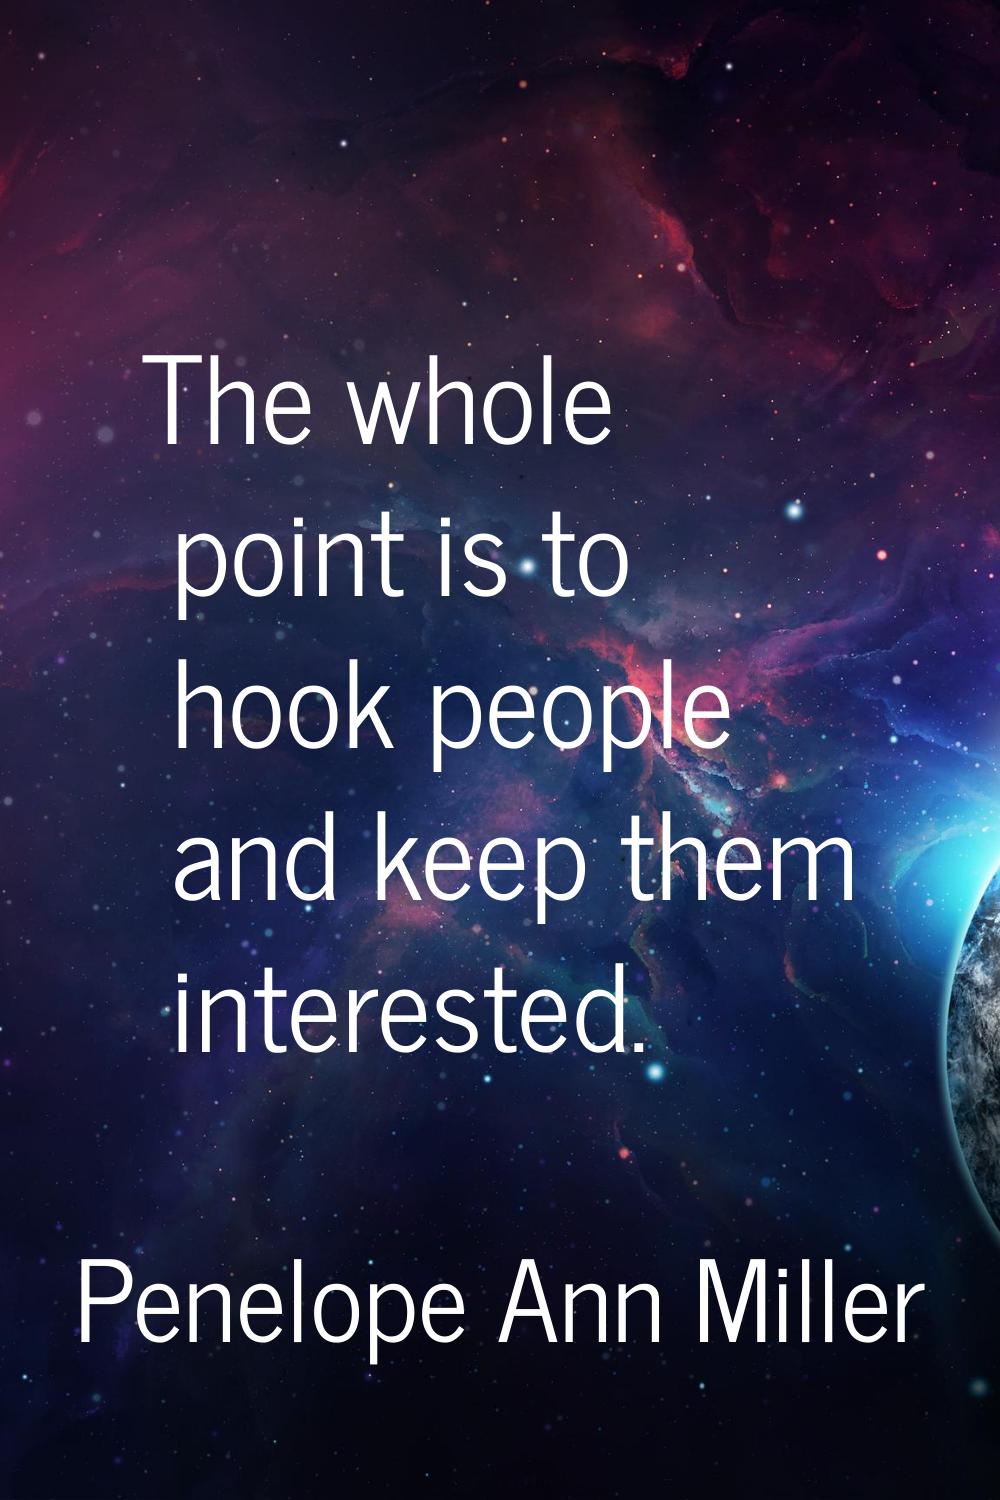 The whole point is to hook people and keep them interested.